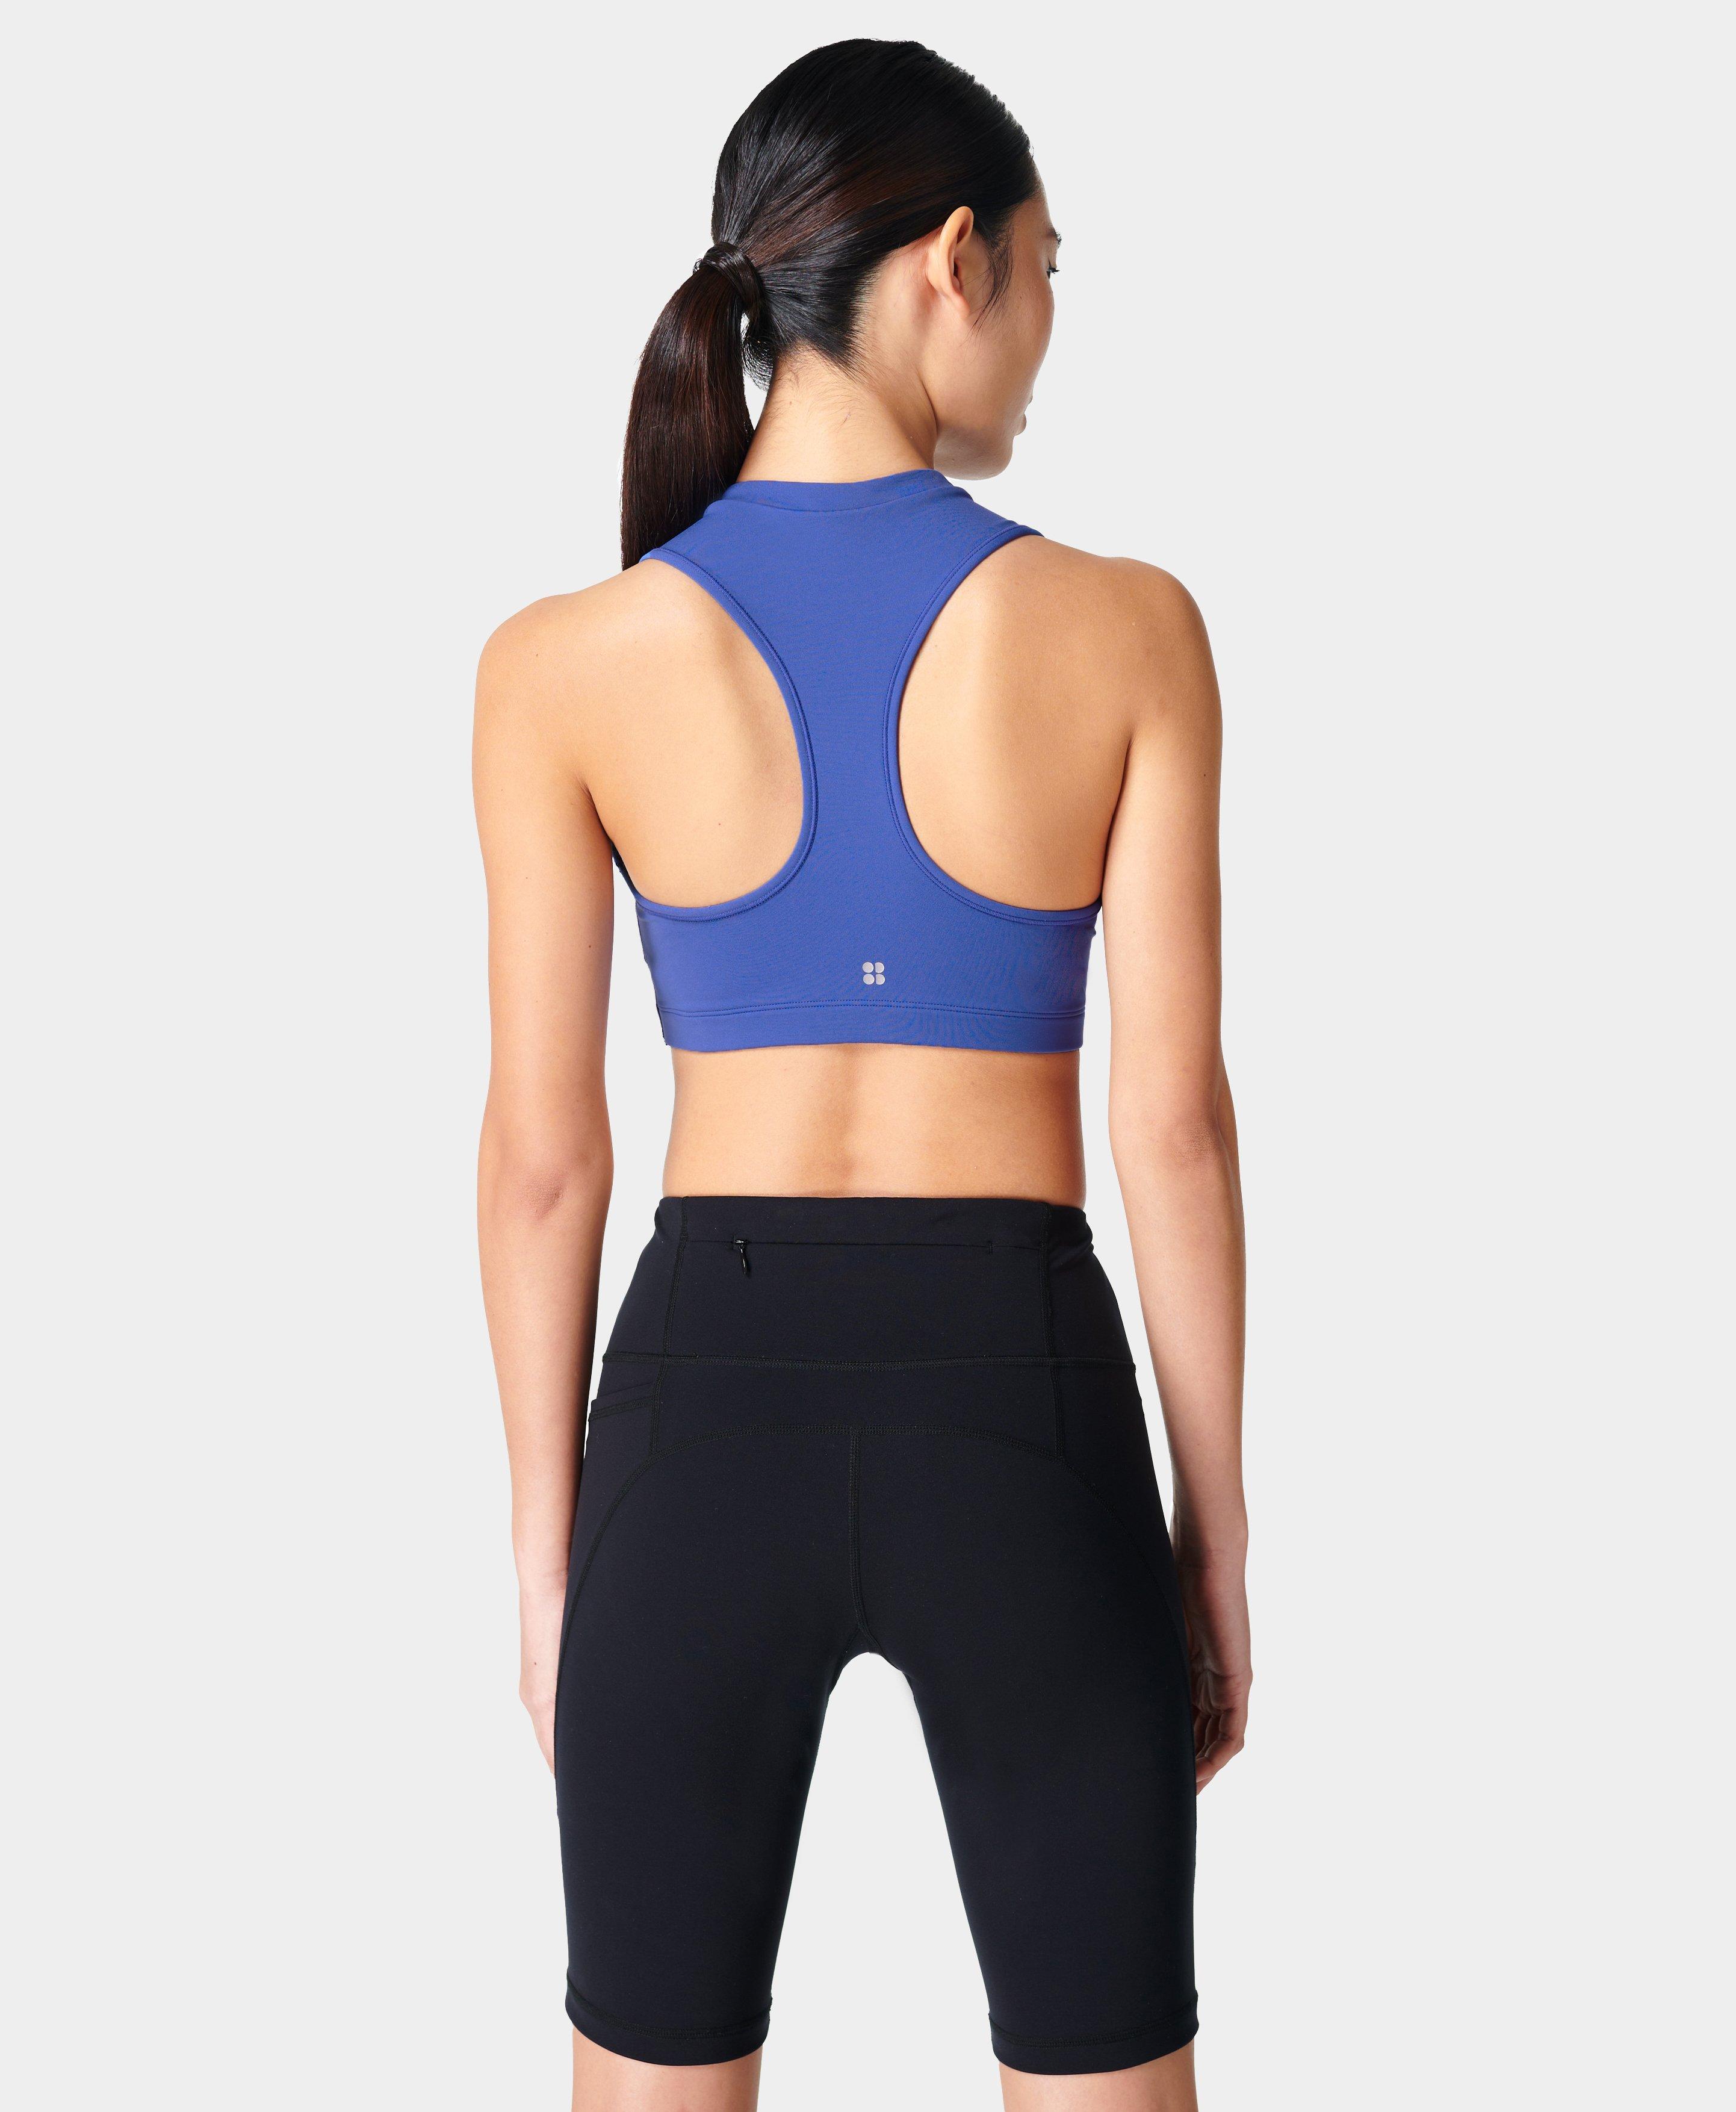 eBib 17325  Taking off a sweaty sports bra should be considered resistance  training.